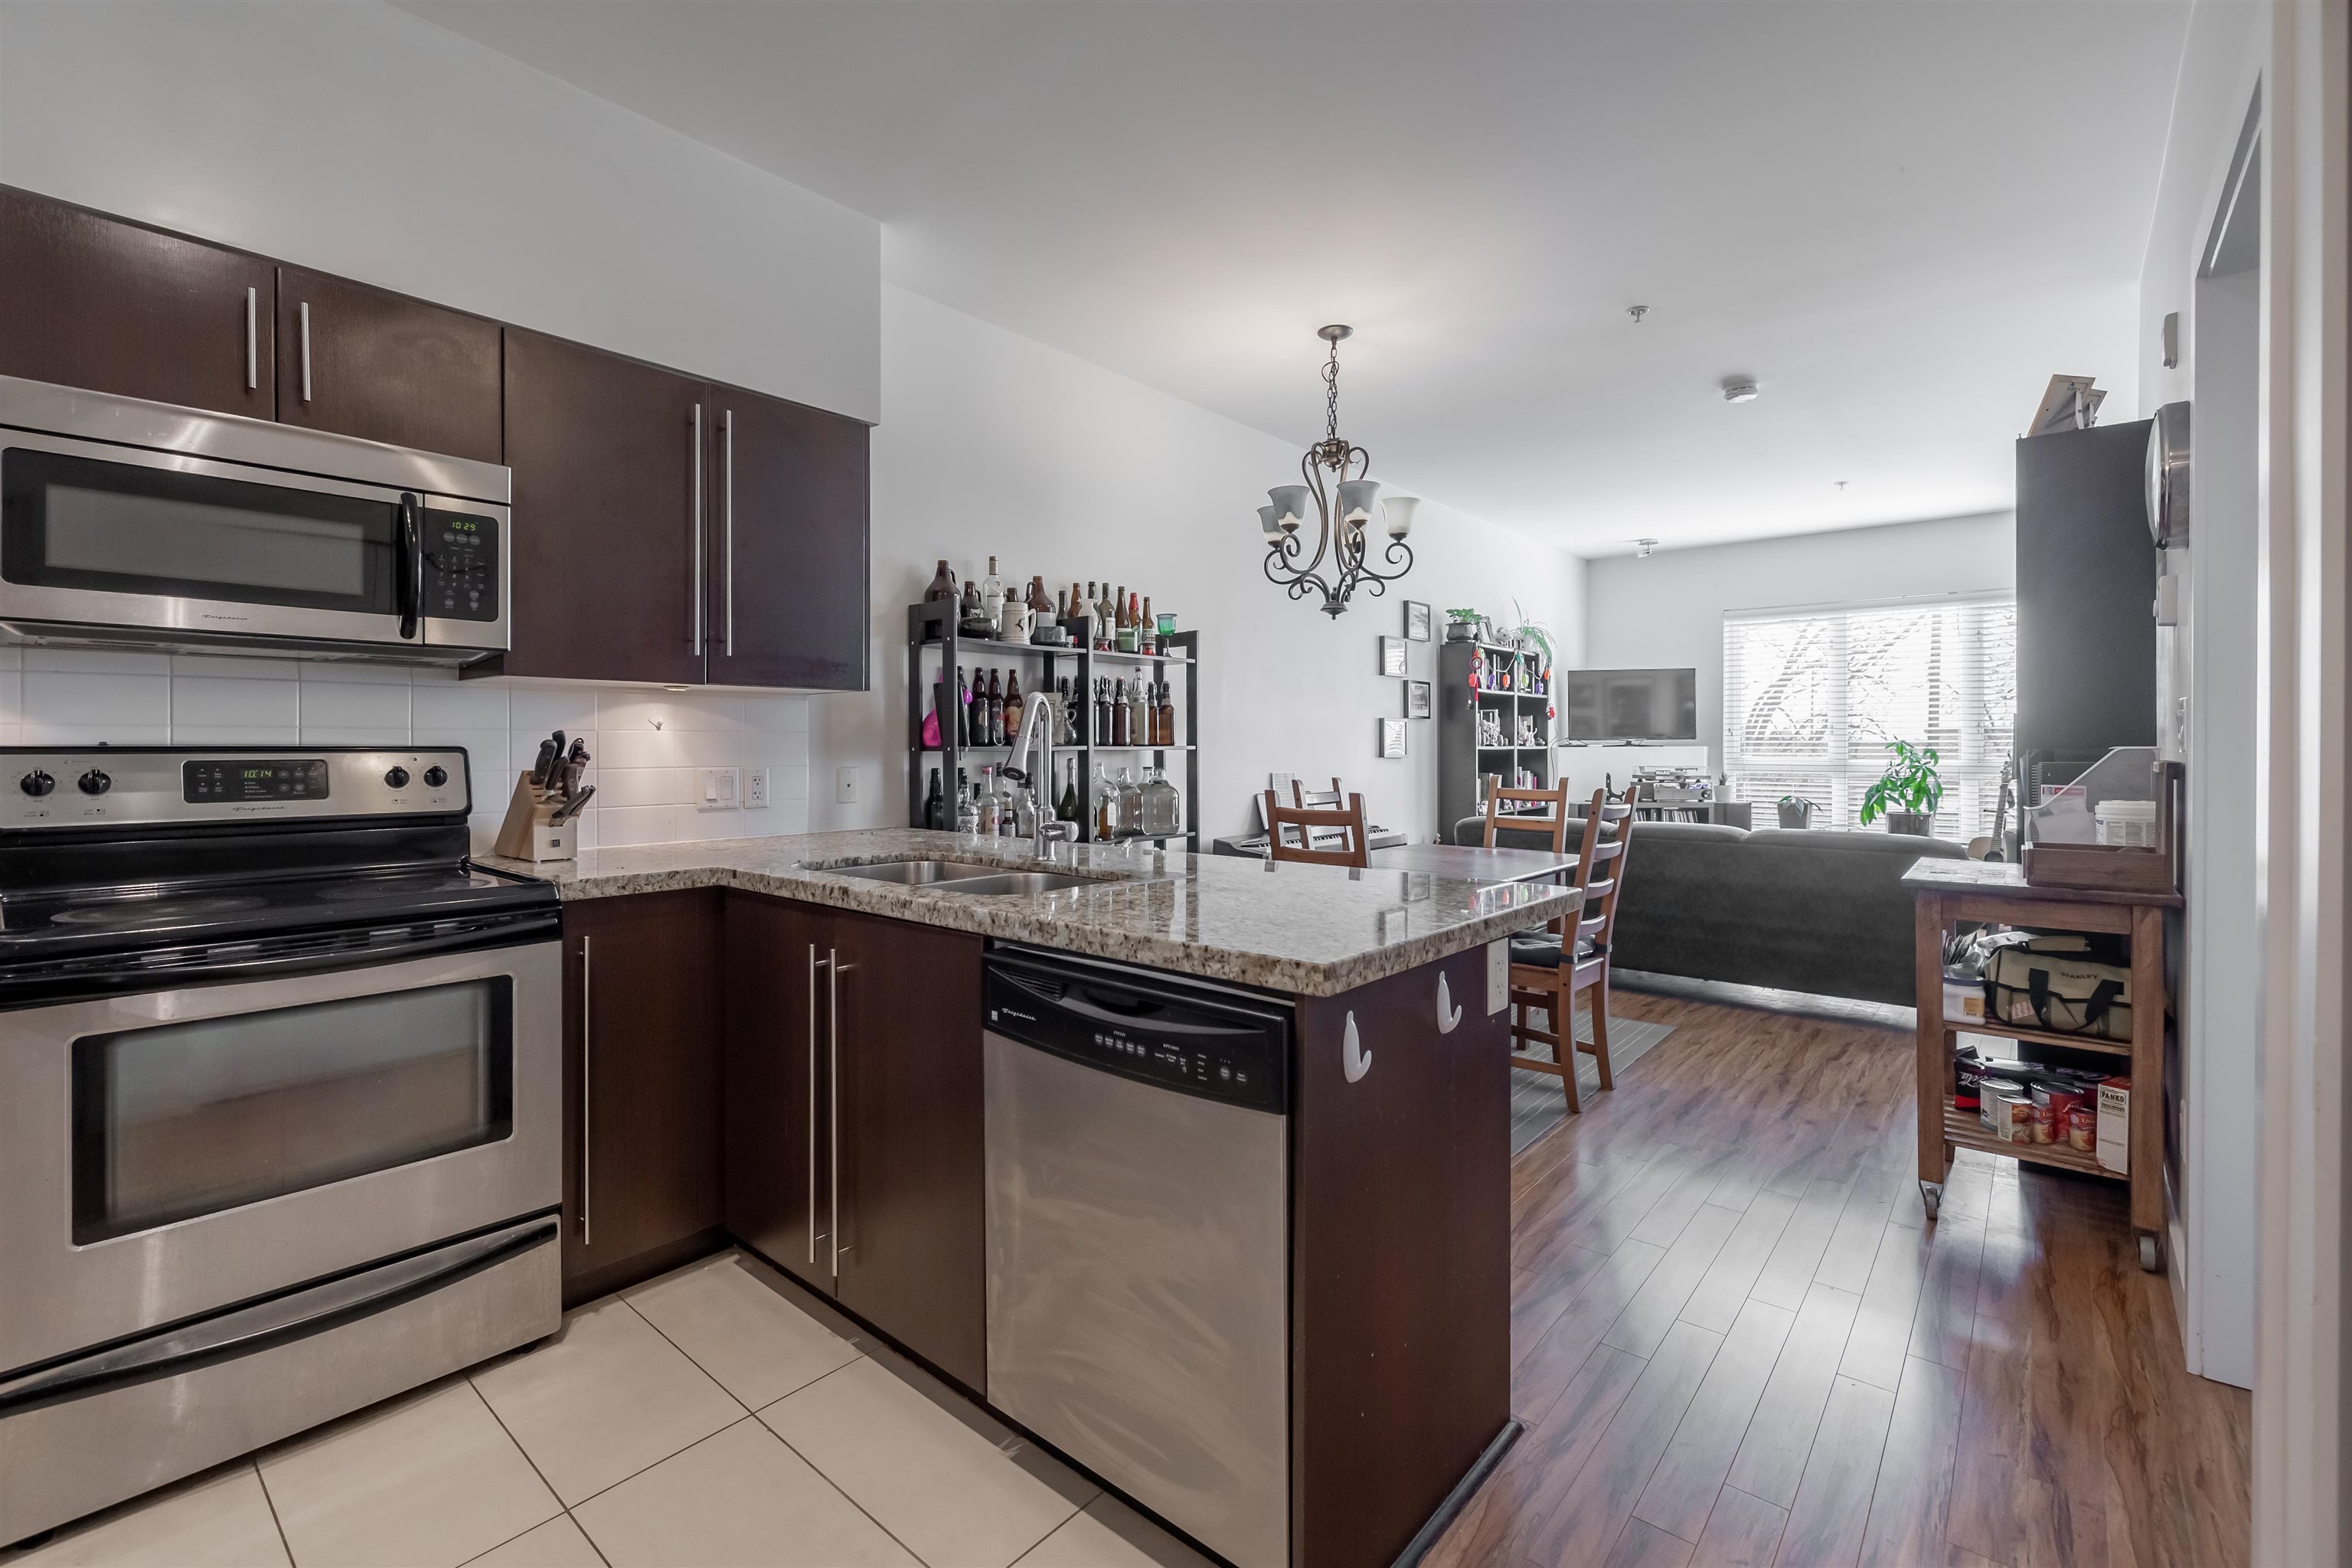 Highgate Apartment/Condo for sale:  1 bedroom 763 sq.ft. (Listed 9600-05-17)